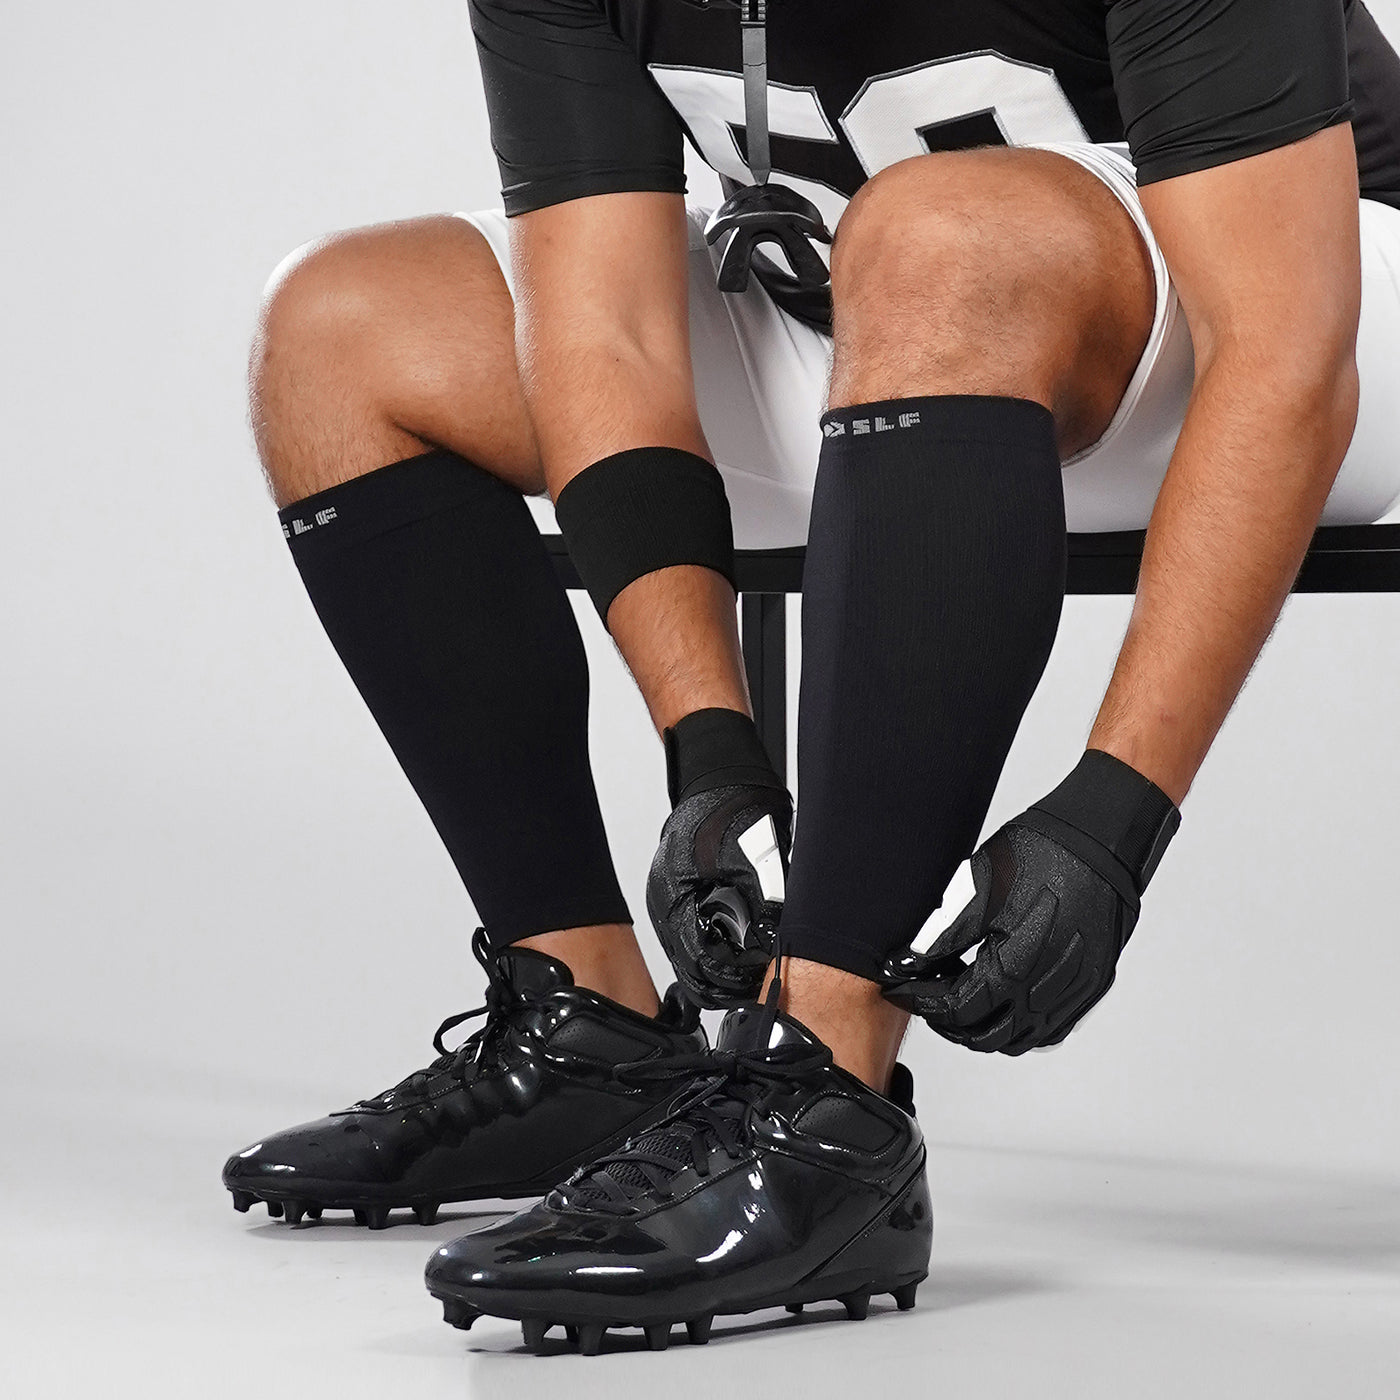 Lineman Black Knitted Compression Calf Sleeves